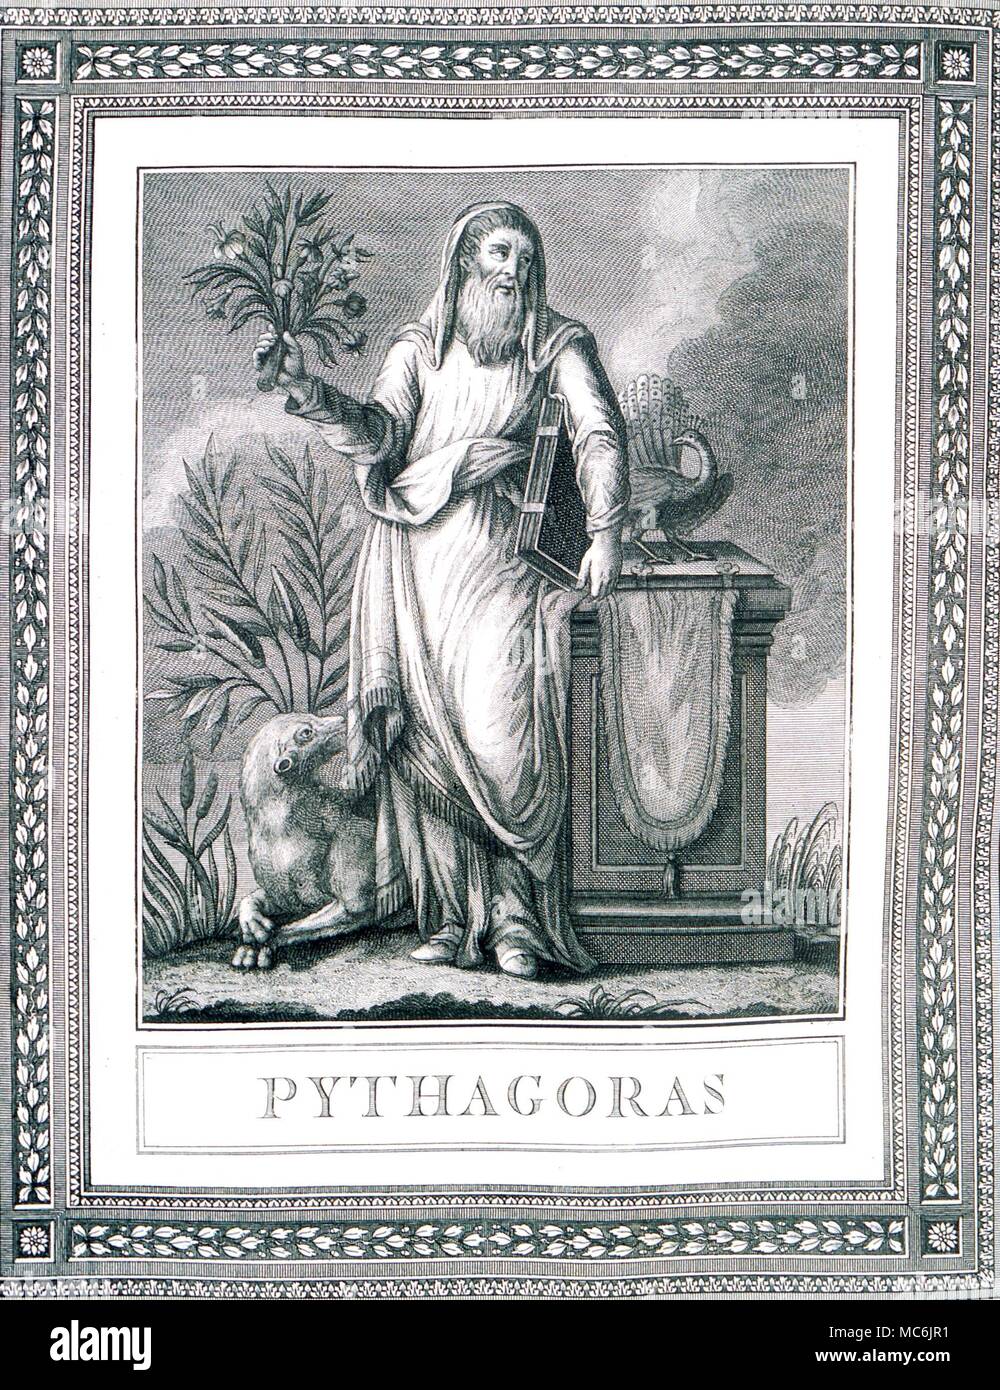 OCCULTISTS - PYTHAGORAS. The philosopher of Samos (6th century BC), whose esoteric school continued much of the Egyptian hermetic wisdom. From the 1792 edition of Jacopo Guarana's Oracoli, Auguri, Aruspici, Sibille, indovinia della Religione Pagana Stock Photo